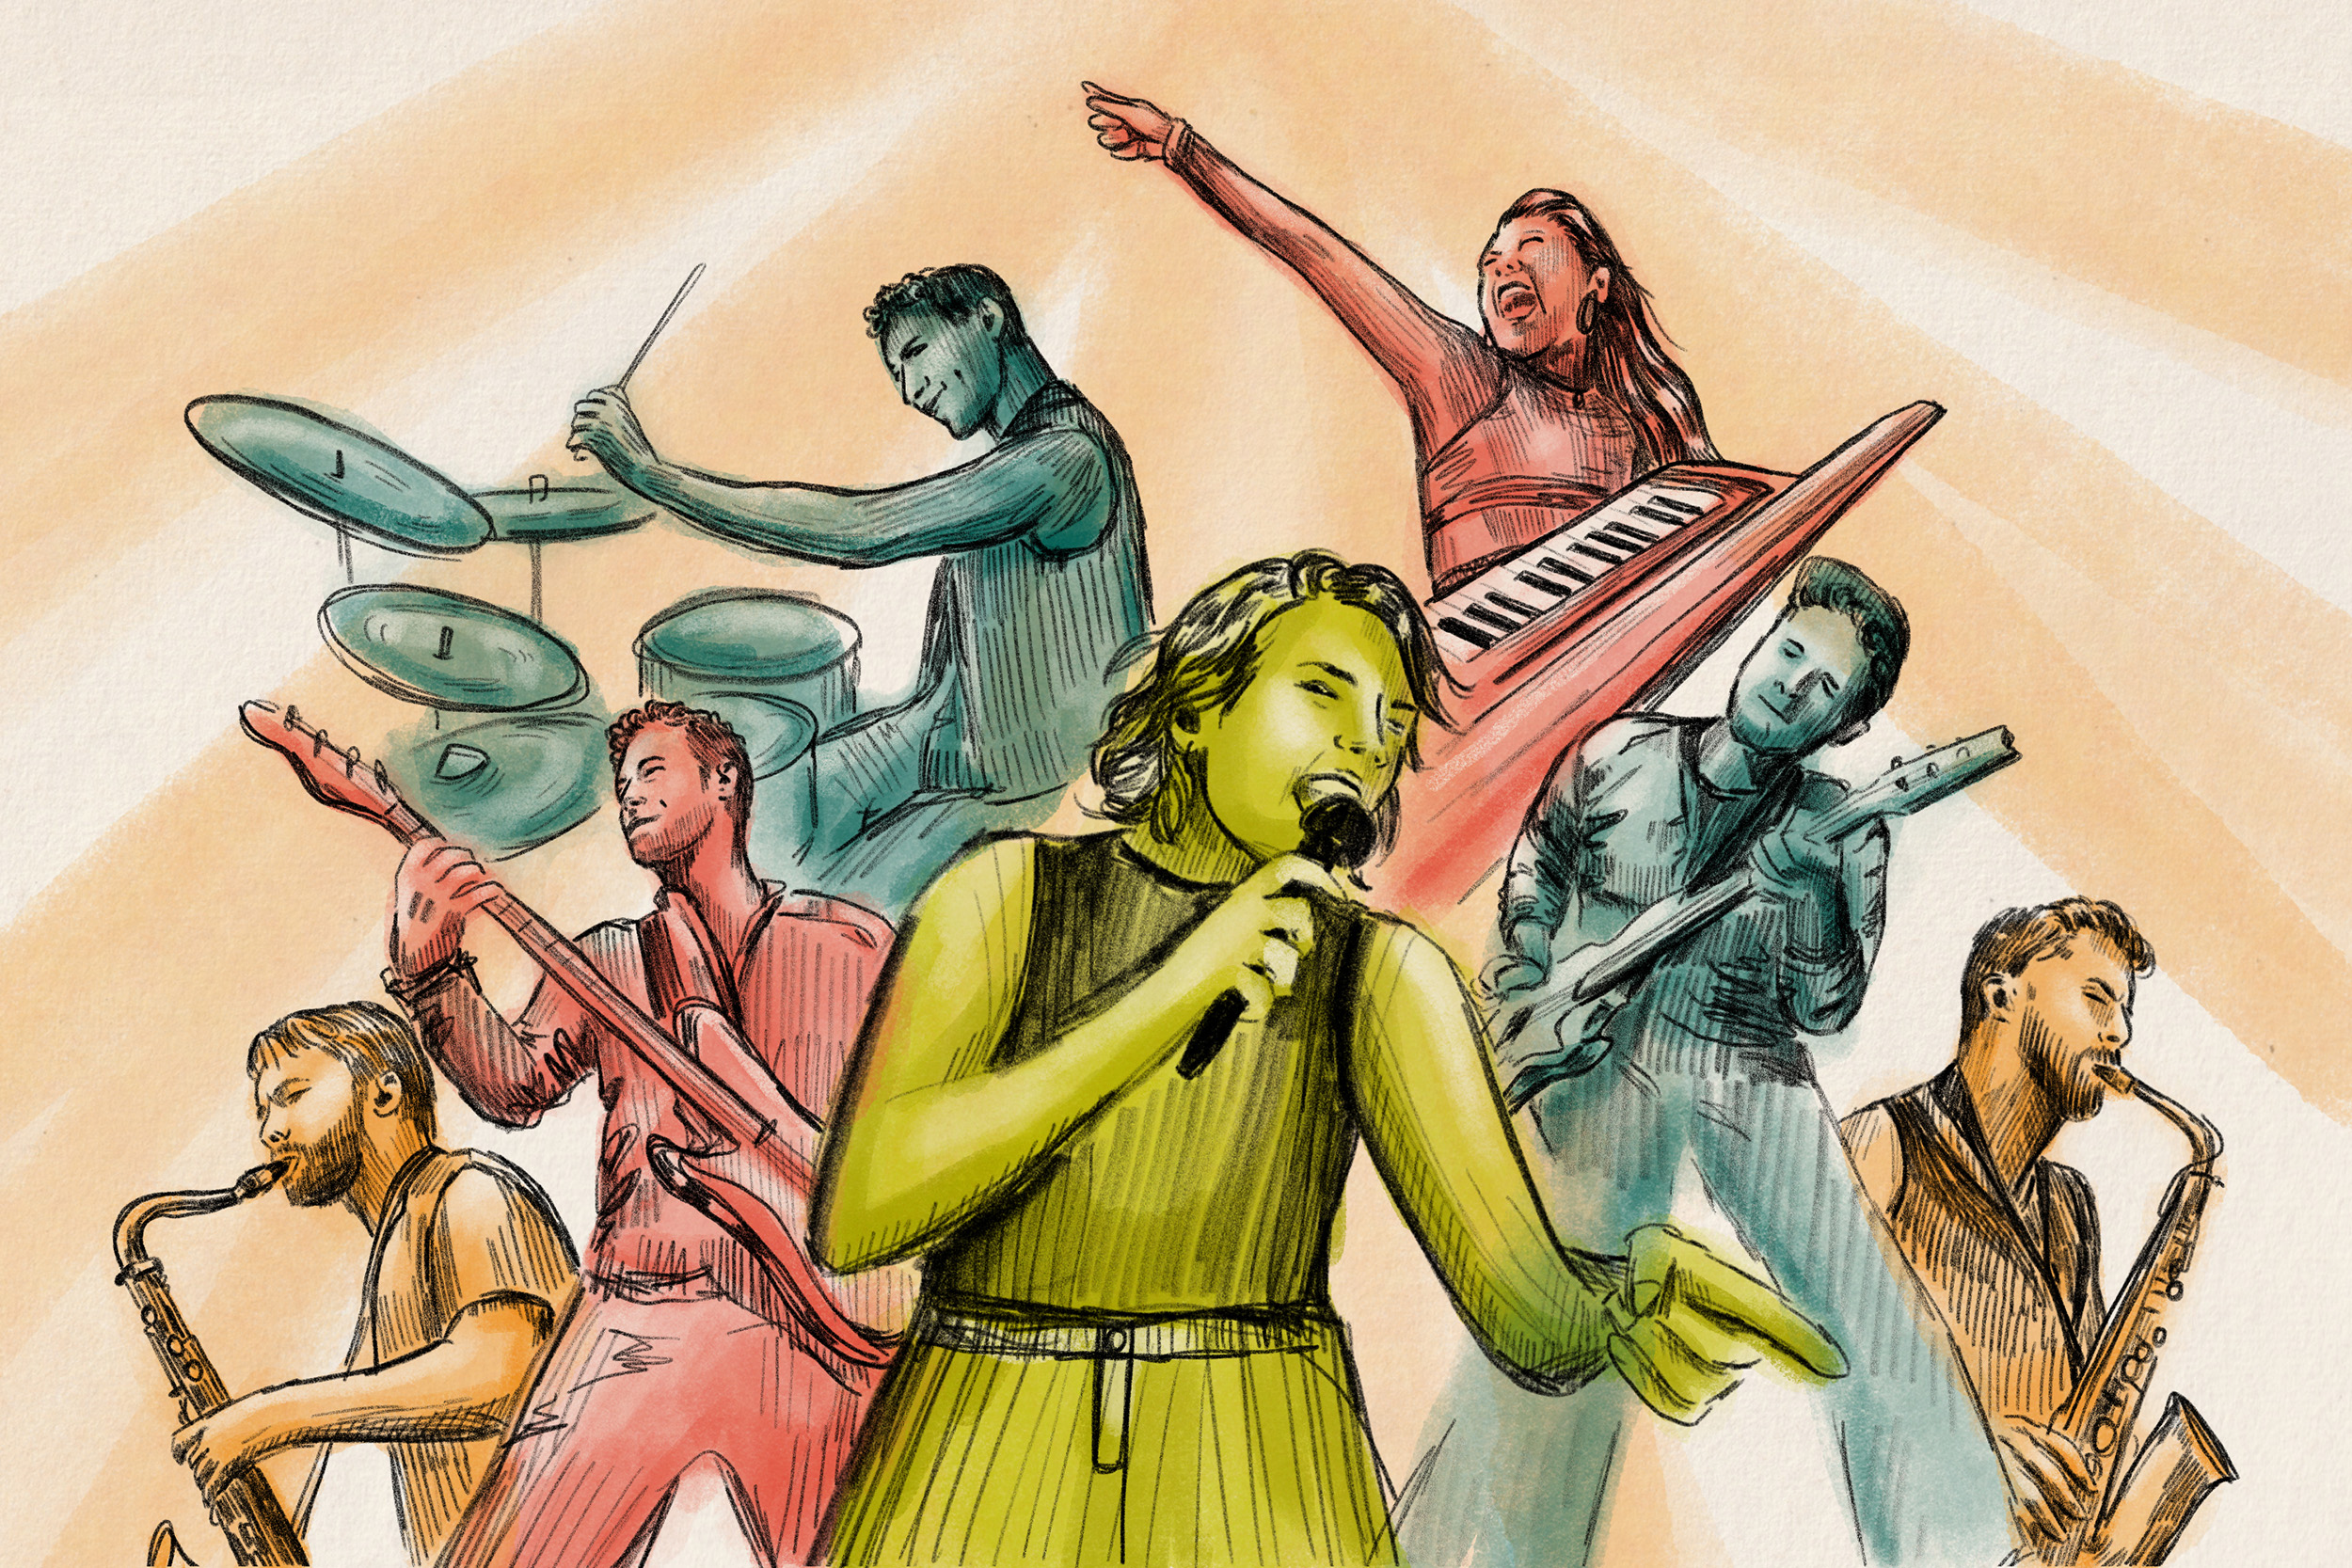 For an article on Sammy Rae and The Friends, a collection of drawings of different people with various instruments.